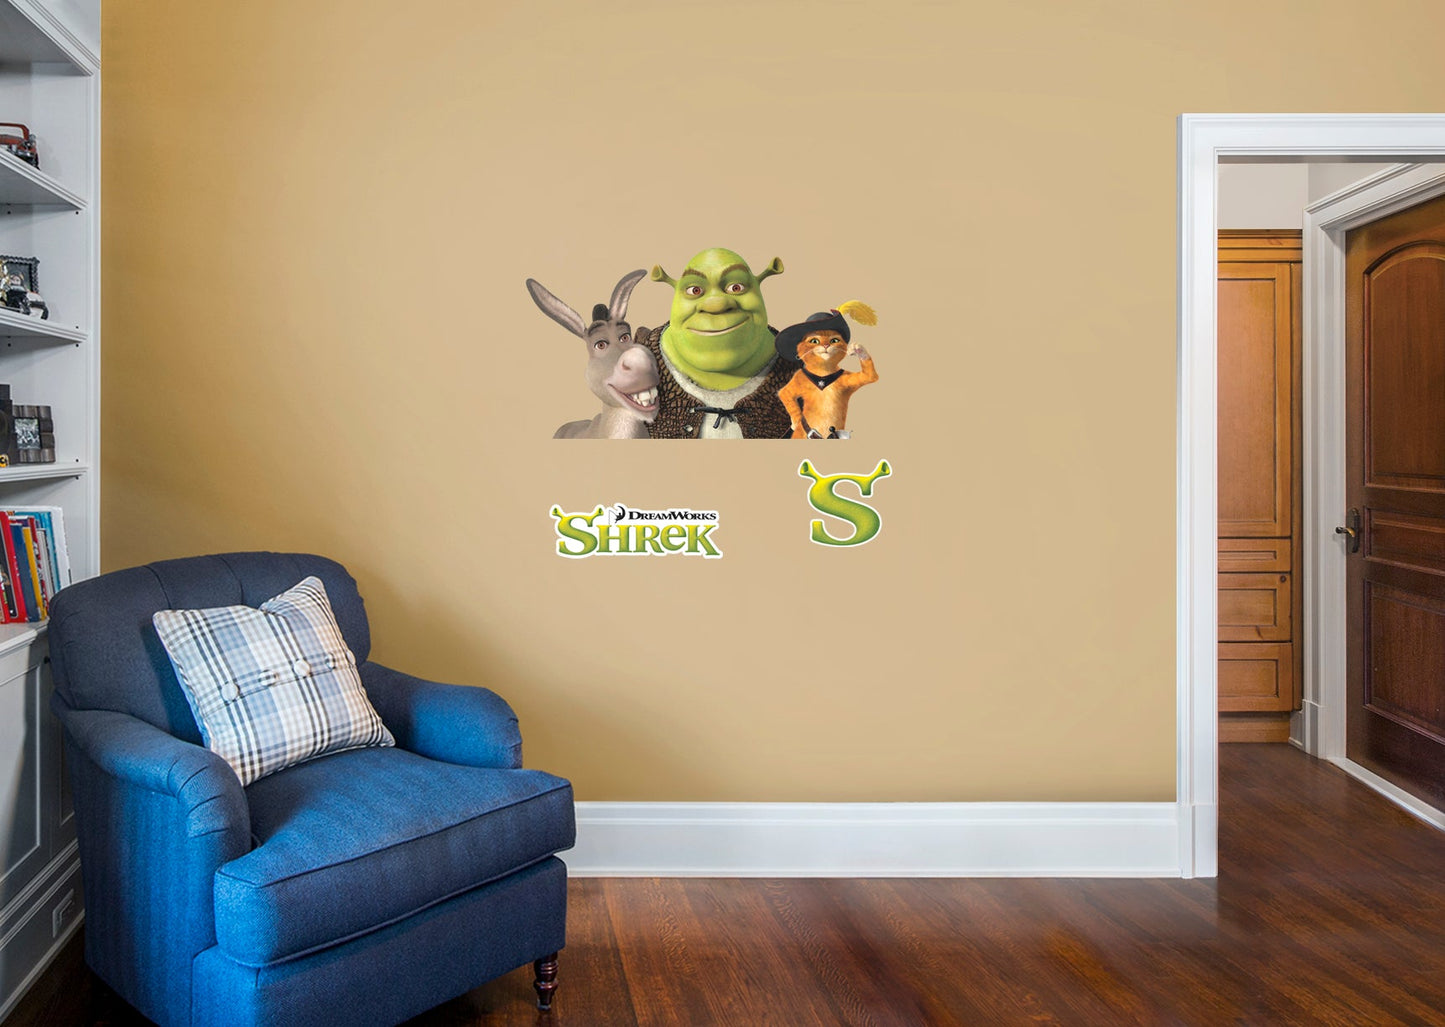 Shrek: Shrek, Donkey, and Puss in Boots RealBig - Officially Licensed NBC Universal Removable Adhesive Decal